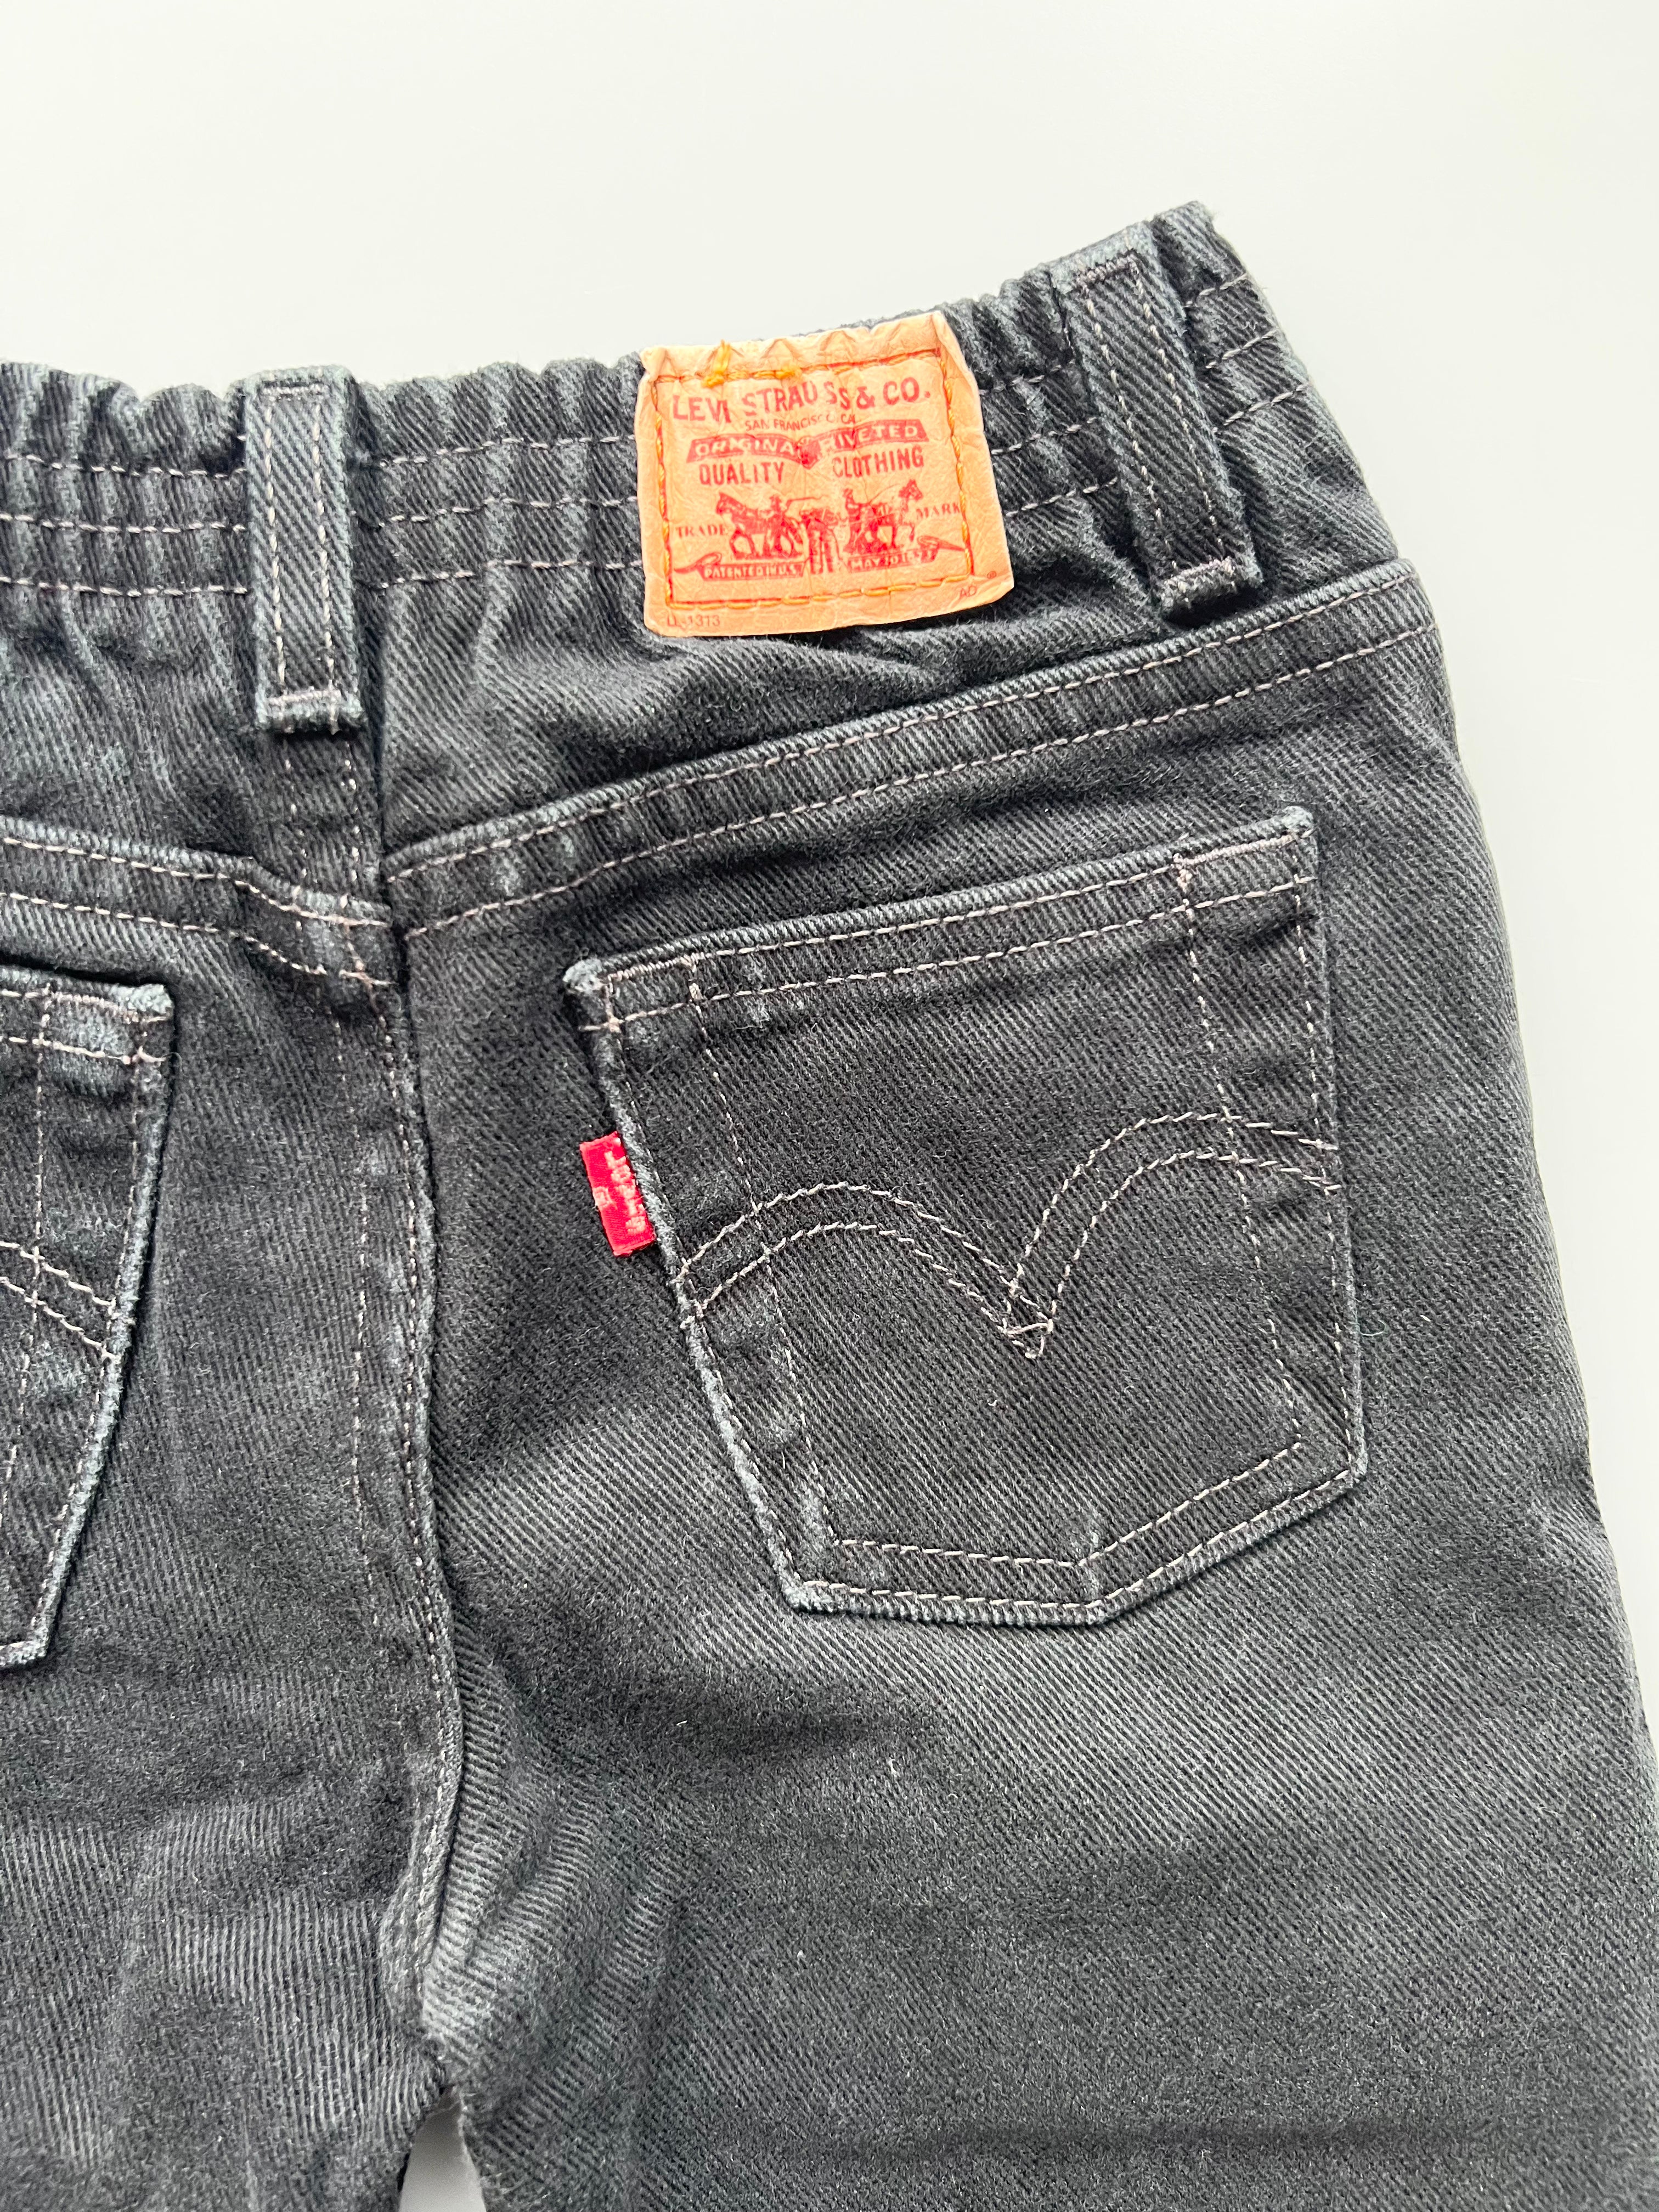 Levi's Vintage Black Relaxed Fit 526's Age 4